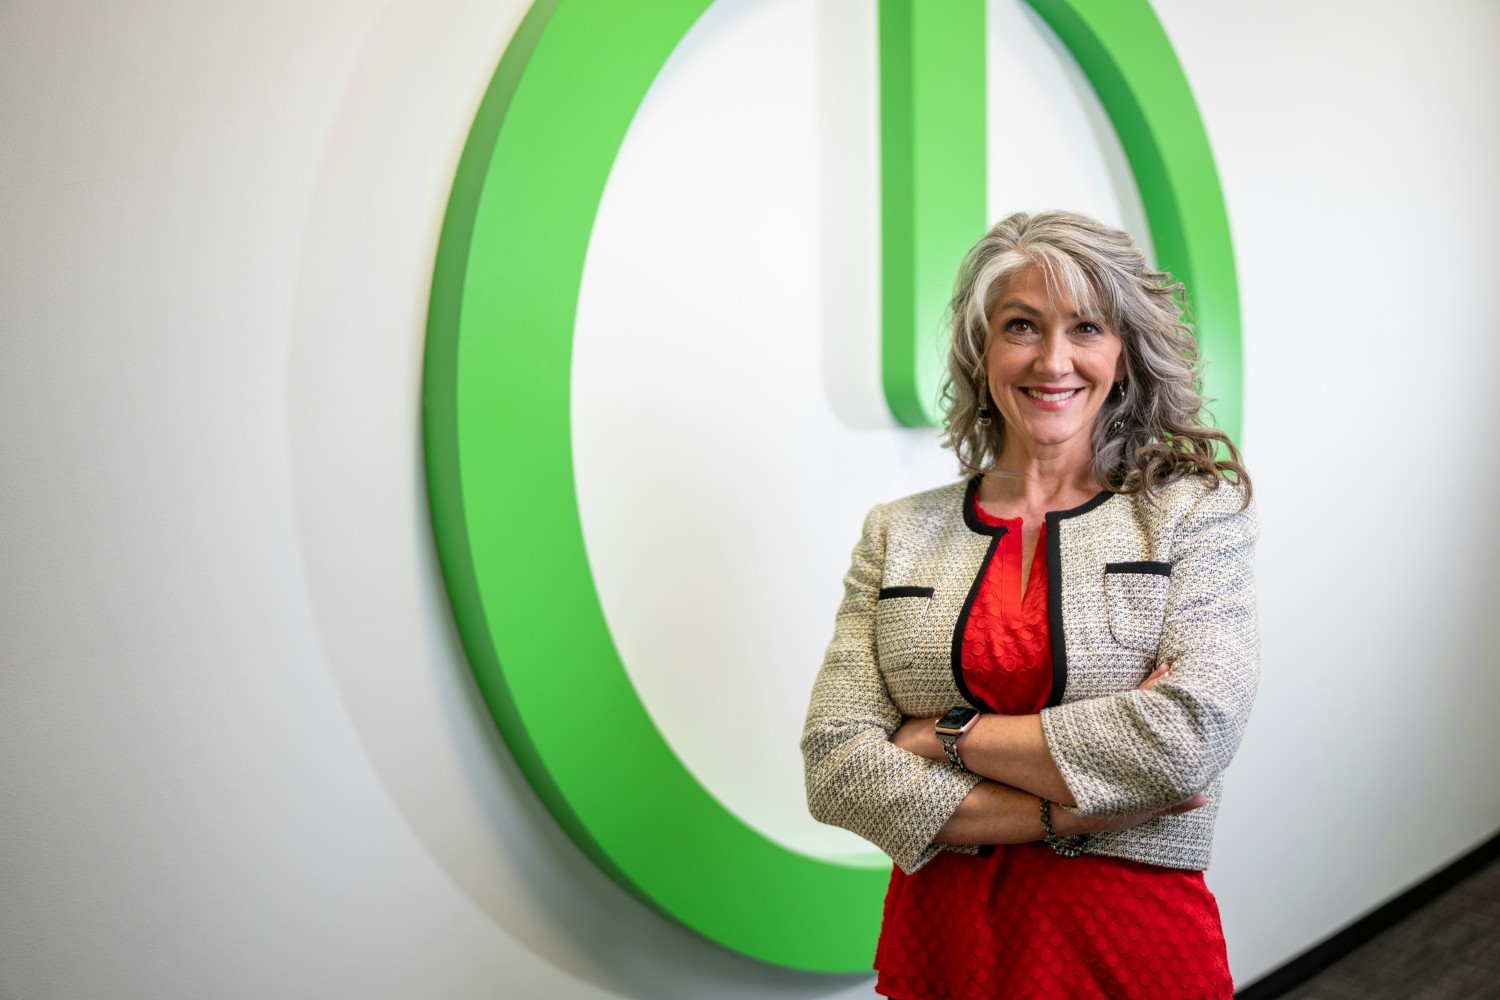 Teresa, Business Segment Manager, has 23+ years in sales and marketing with Schneider Electric.